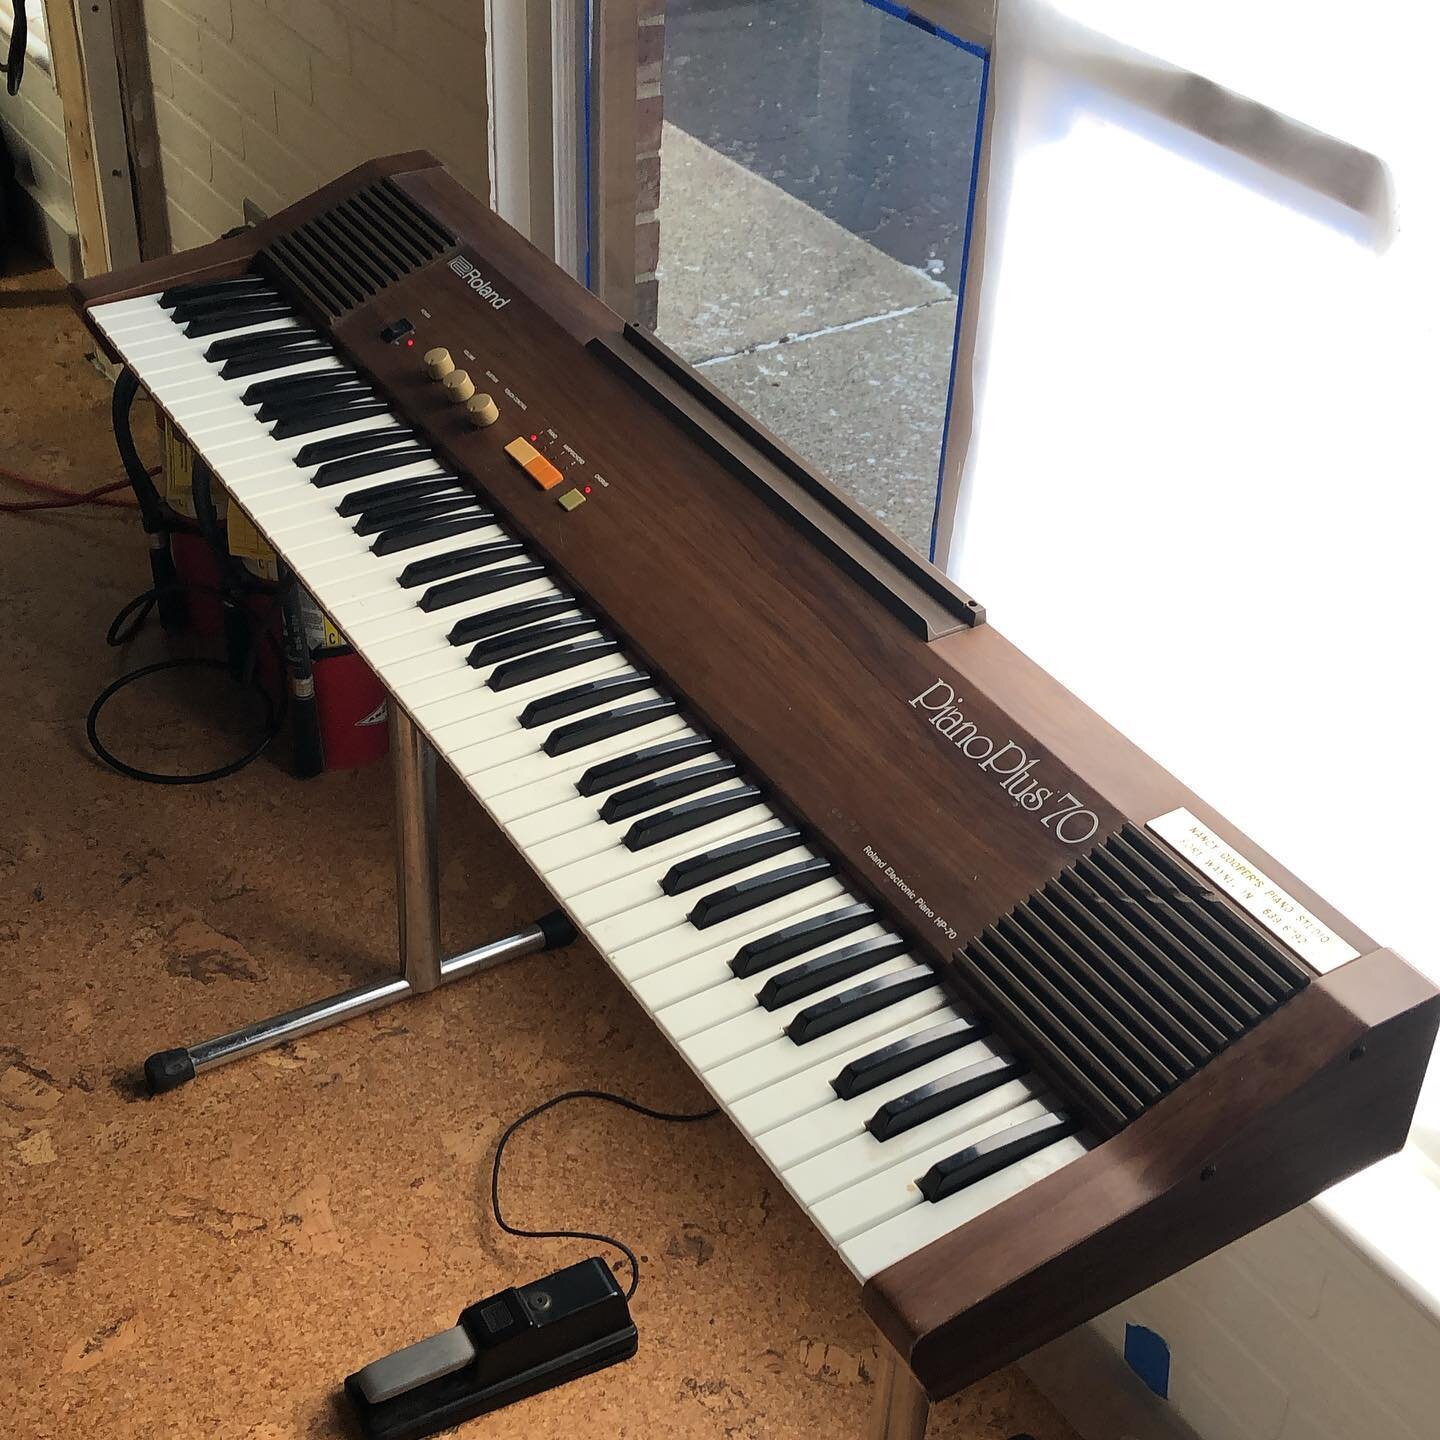 Welcome to the orphanage. This early 80&rsquo;s @rolandglobal Roland Piano Plus 70 was dropped off yesterday. The first acquisition for the new location. It needed it&rsquo;s switches cleaned and will need a new power cord. The chorus is cool and the